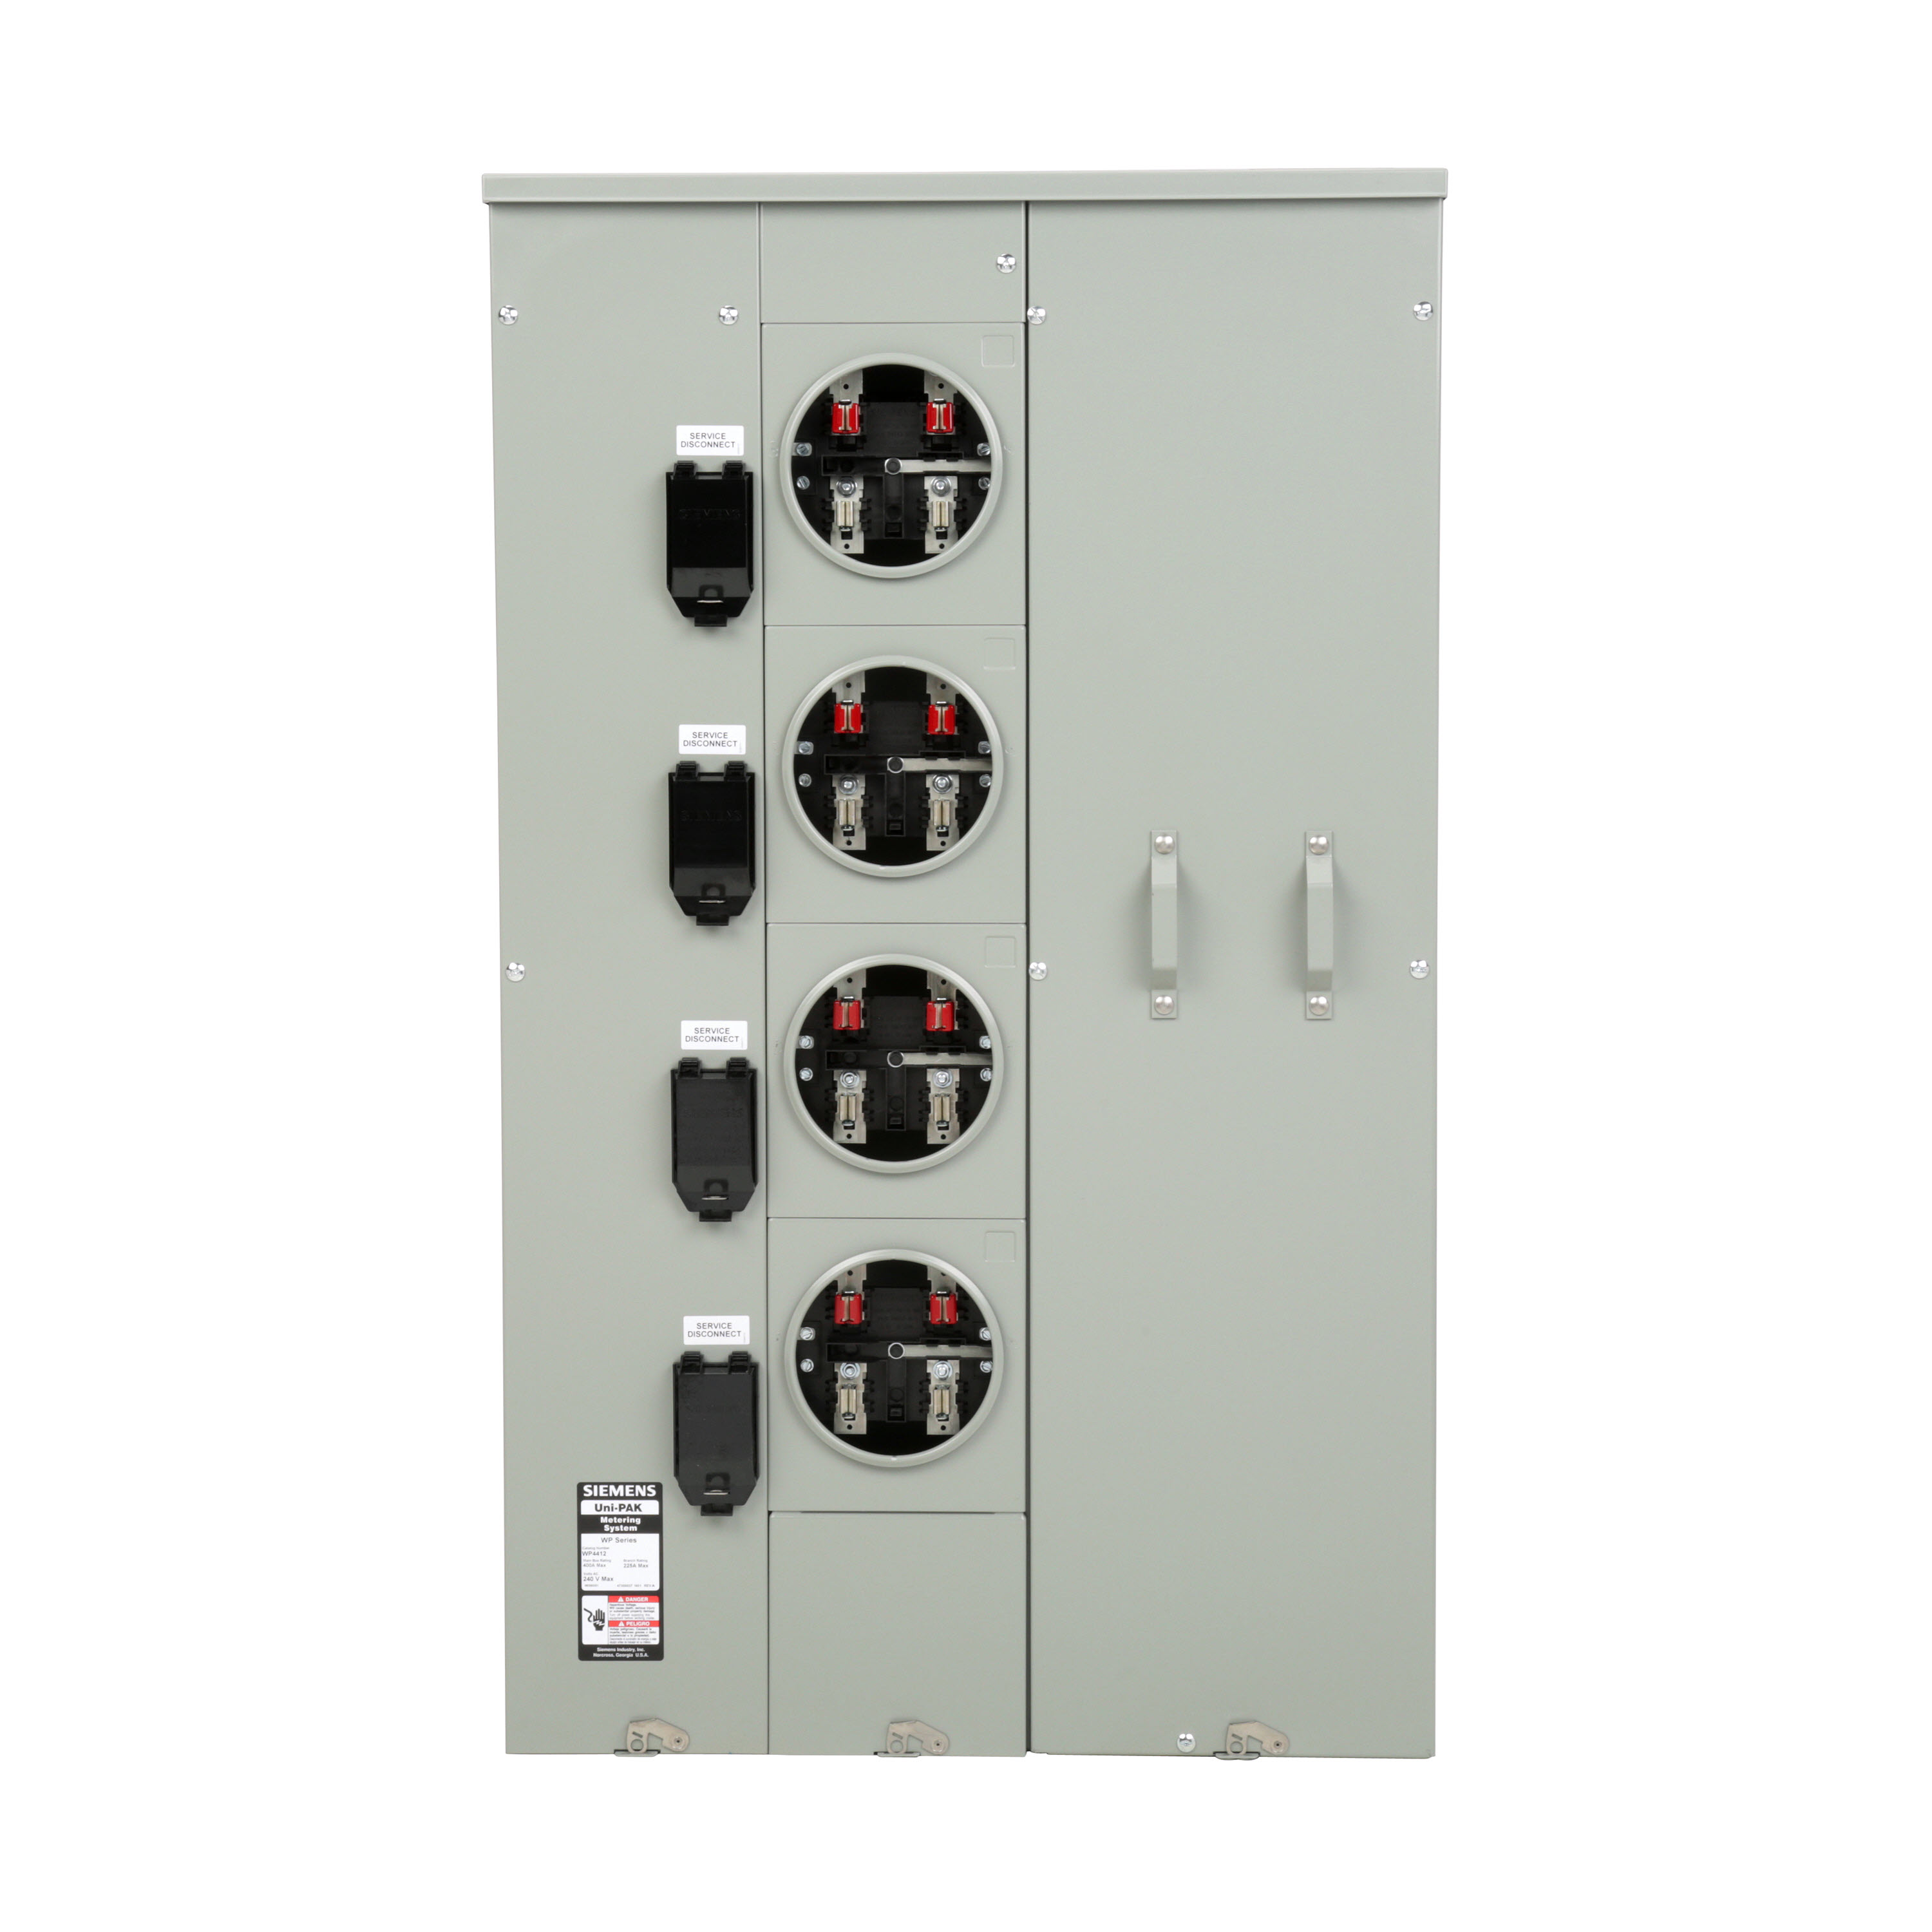 Siemens Low Voltage s Multi-Family Metering Line of PAK Metering Standard 225A as part of the PAK Metering Standard 225A Group. Type UNI-PAK Features NO BYPASSAppn GARDEN - STYLE Std UL-50,67,414 V. Rating 120/240V A. Rating 400A Phase 1PH Size 9.00 x 29.85 x 48.630 No. Of Cutouts 11 Cutout Size 1 x (1/2,3/4,1,1-1/4 ), 6 x (2-1/2,2 ,1-1/2,1-1/4,1 ), 2 x (4,3-1/2,3,2-1/2,2 ), 2X4 Cable Entry TOP OR BOTTOM FEED Terminal 3X2 STUDS. Insulated.Appn . Wall Mounted. Enclosure RING